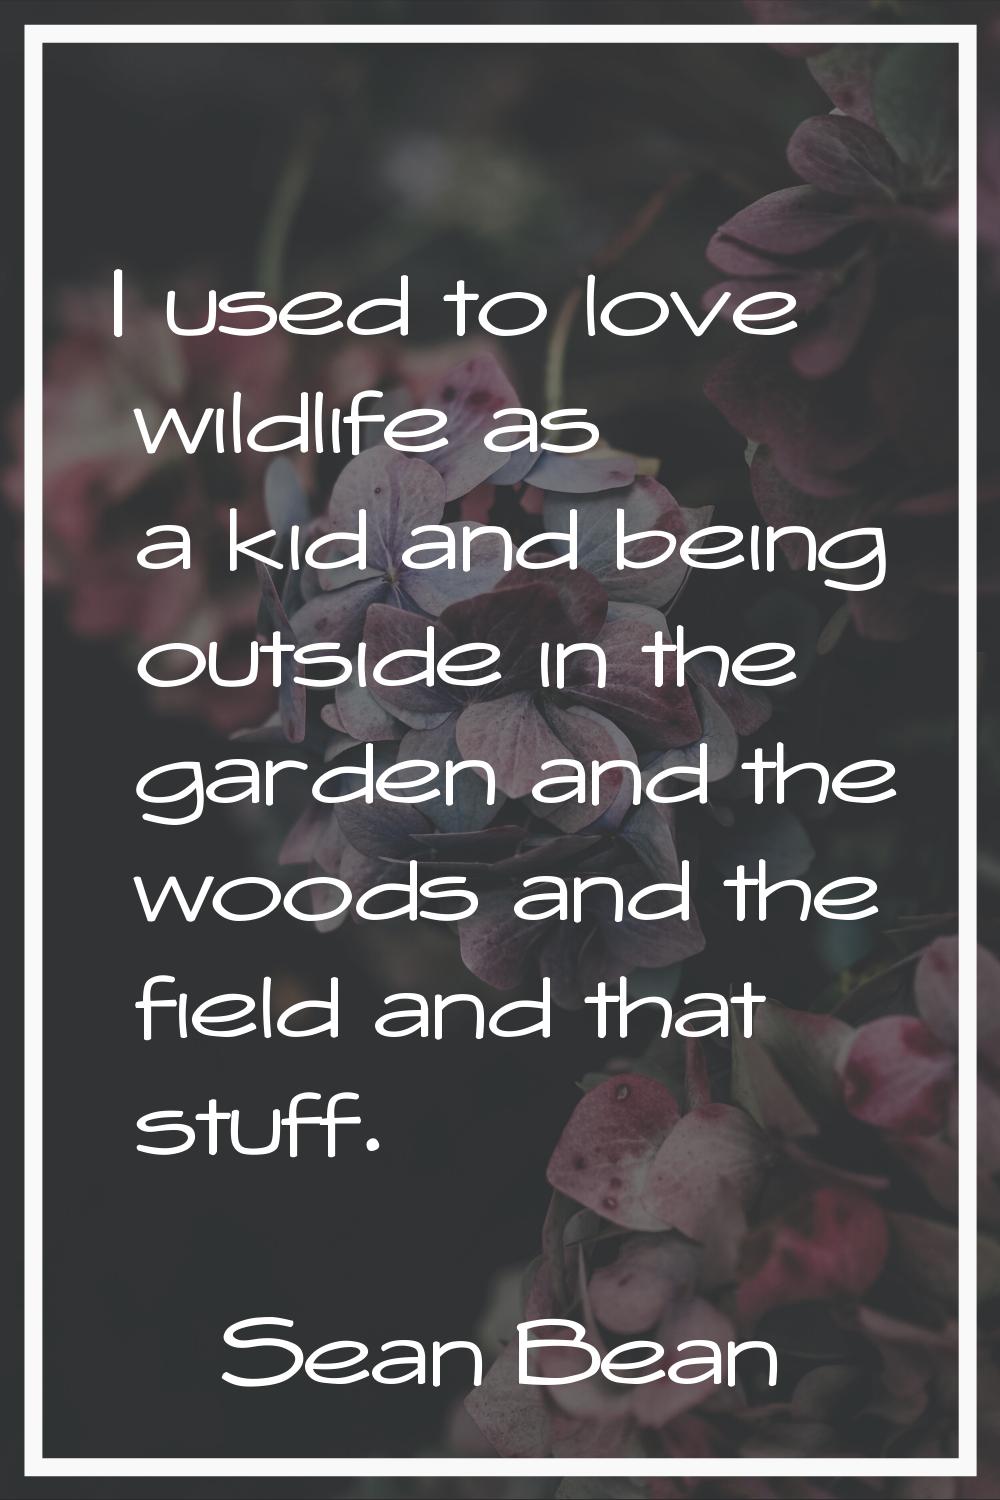 I used to love wildlife as a kid and being outside in the garden and the woods and the field and th